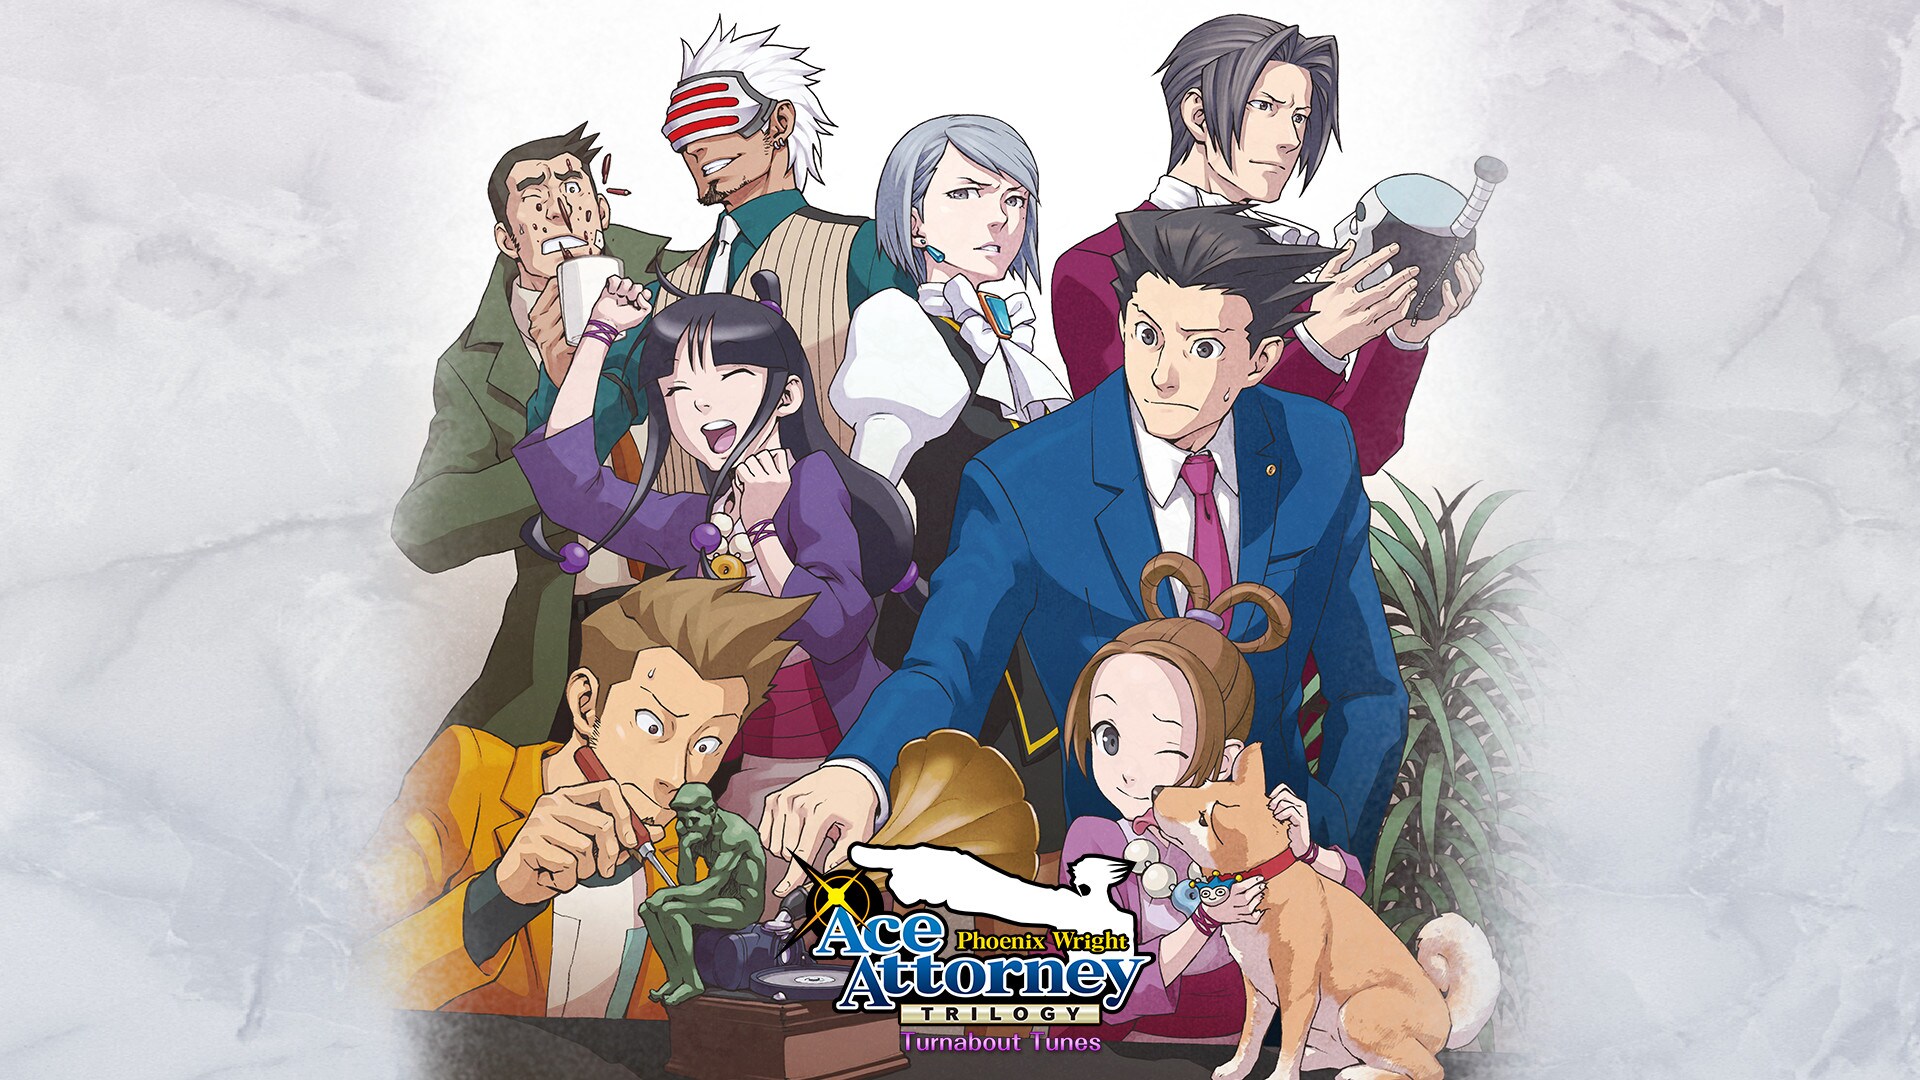 Phoenix Wright: Ace Attorney Trilogy - Turnabout Tunes Bundle (PC) - Steam Key - GLOBAL - 1